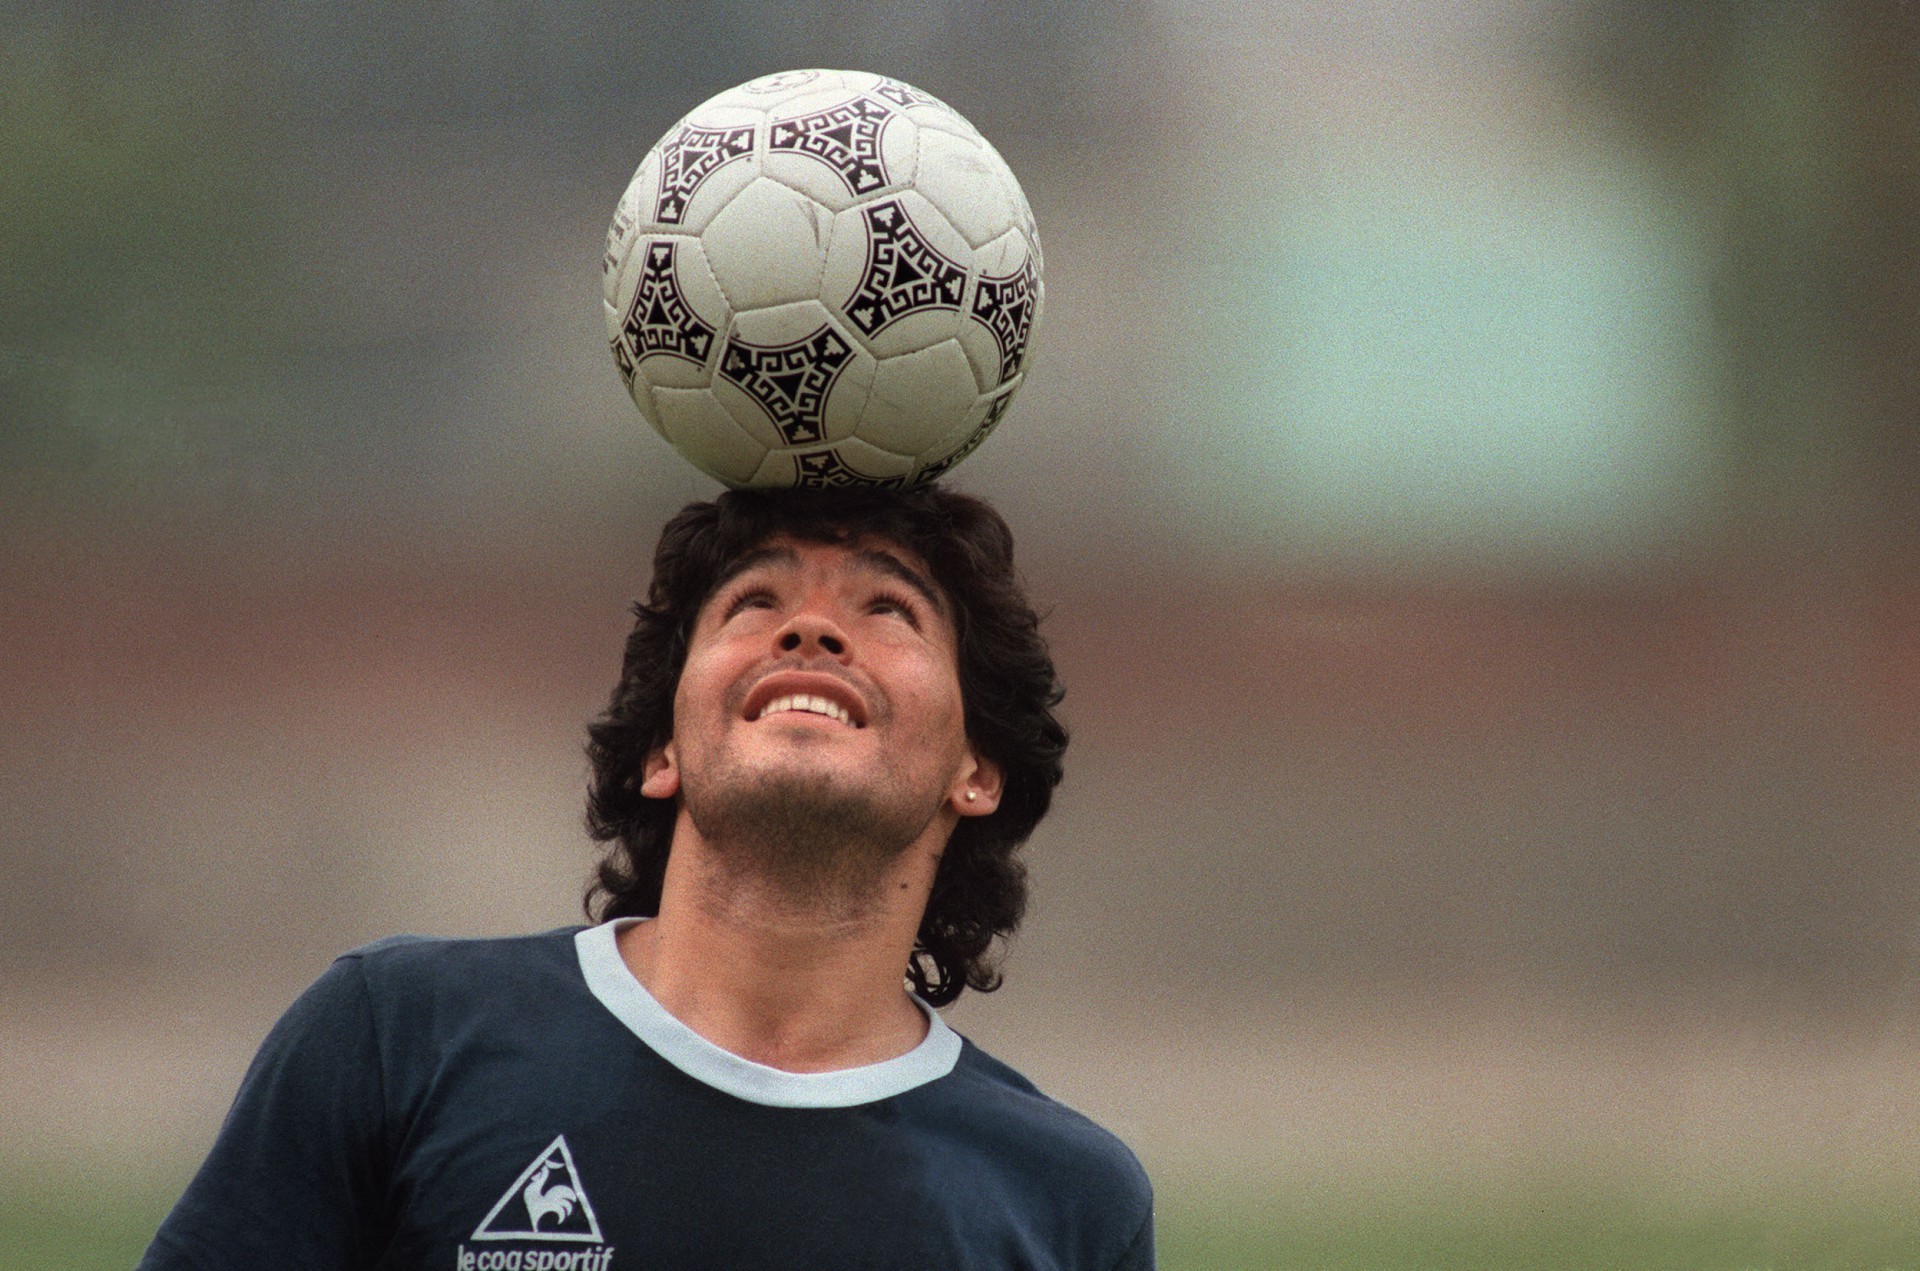 (FILES) In this file photo taken on May 22, 1986 Argentine soccer star Diego Maradona, wearing a diamond earring, balances a soccer ball on his head as he walks off the practice field following the national selection's 22 May 1986 practice session in Mexico City. - Next November 25, 2021 marks the first anniversary of Diego Maradona's death. (Photo by JORGE DURAN / AFP). (Foto: JORGE DURAN/AFP)